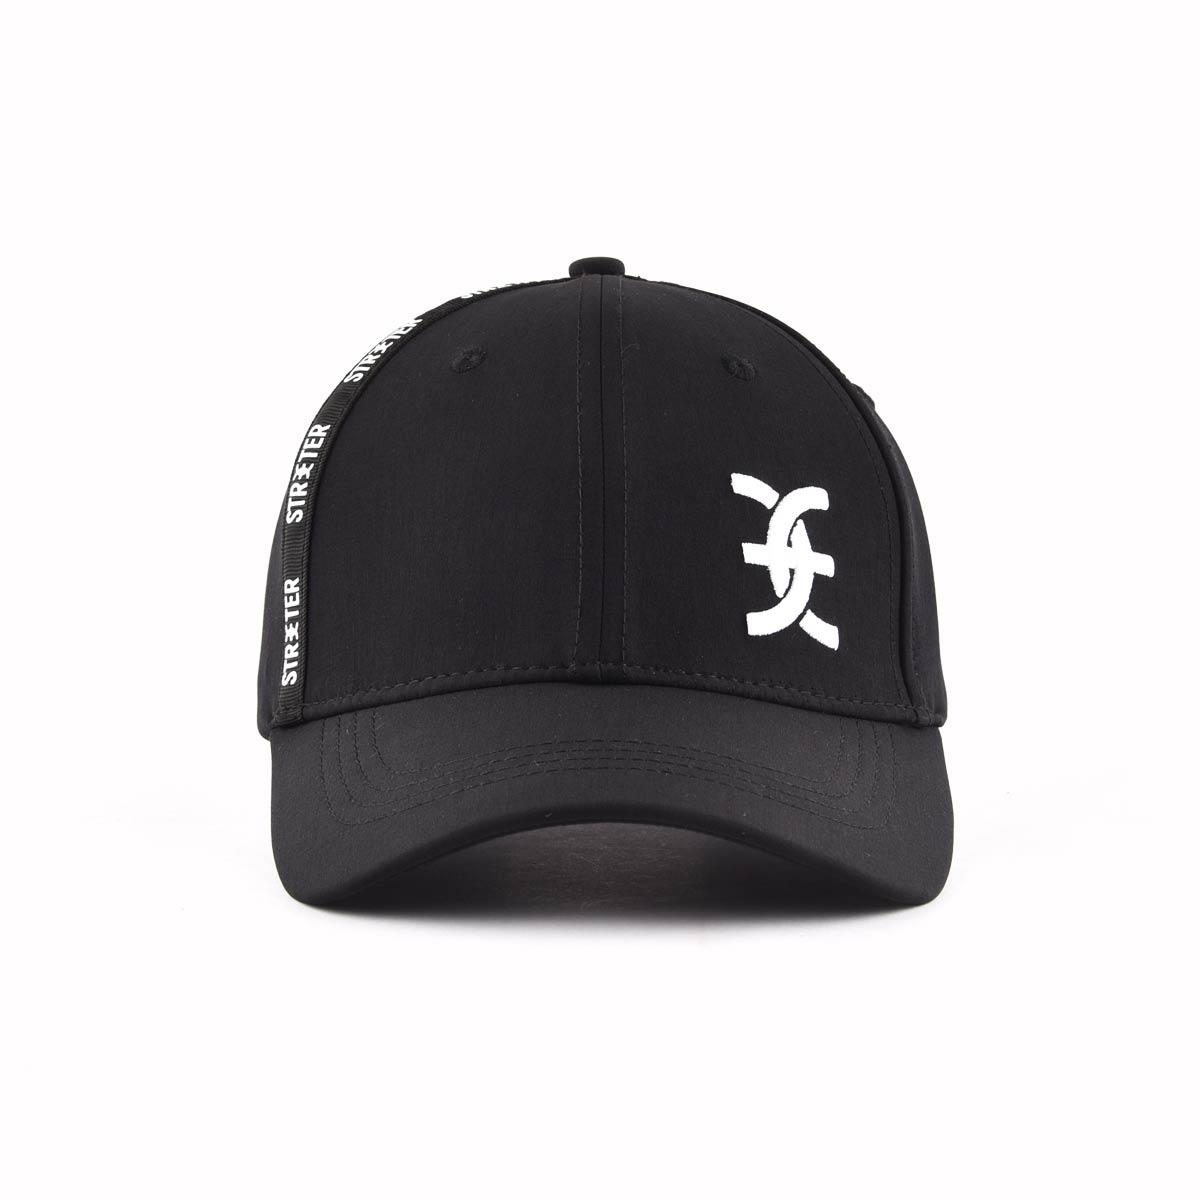 aung-crown-unisex-black-and-white-baseball-hat-KN2012232